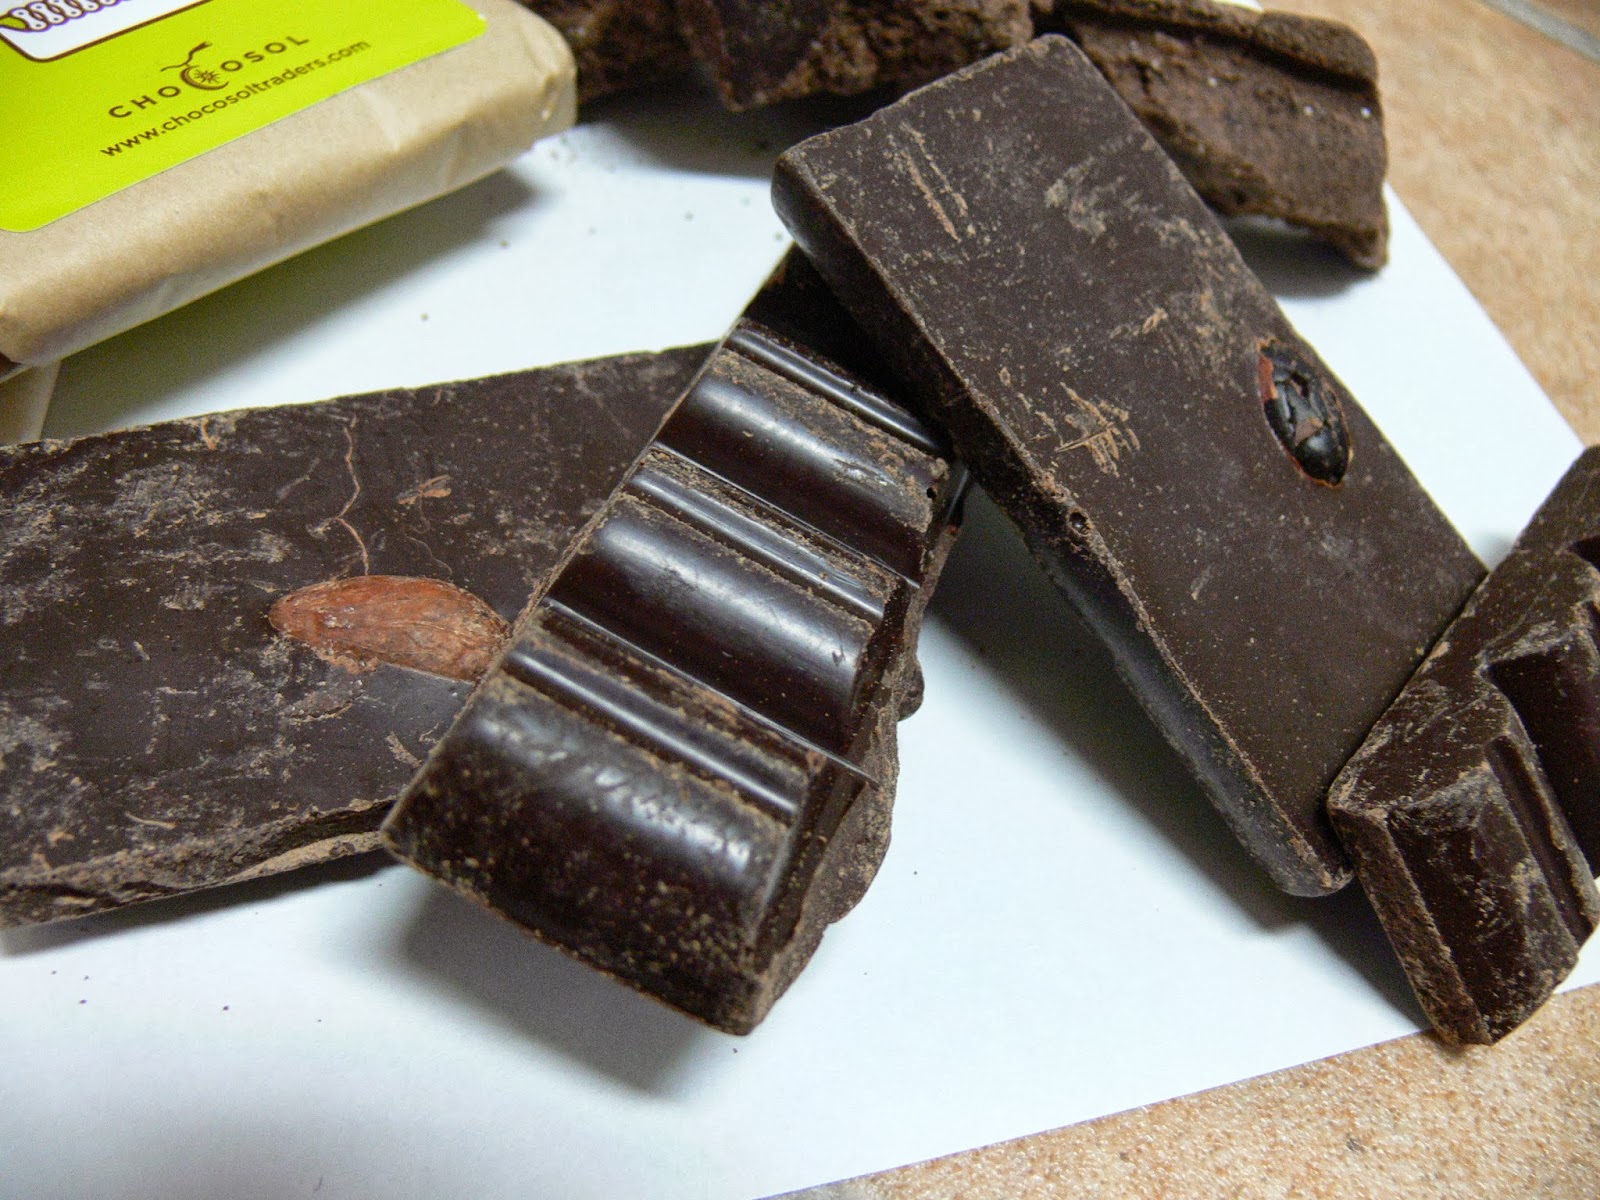 The Ultimate Chocolate Blog: Canada's Growing Bean-to-Bar, Craft ...